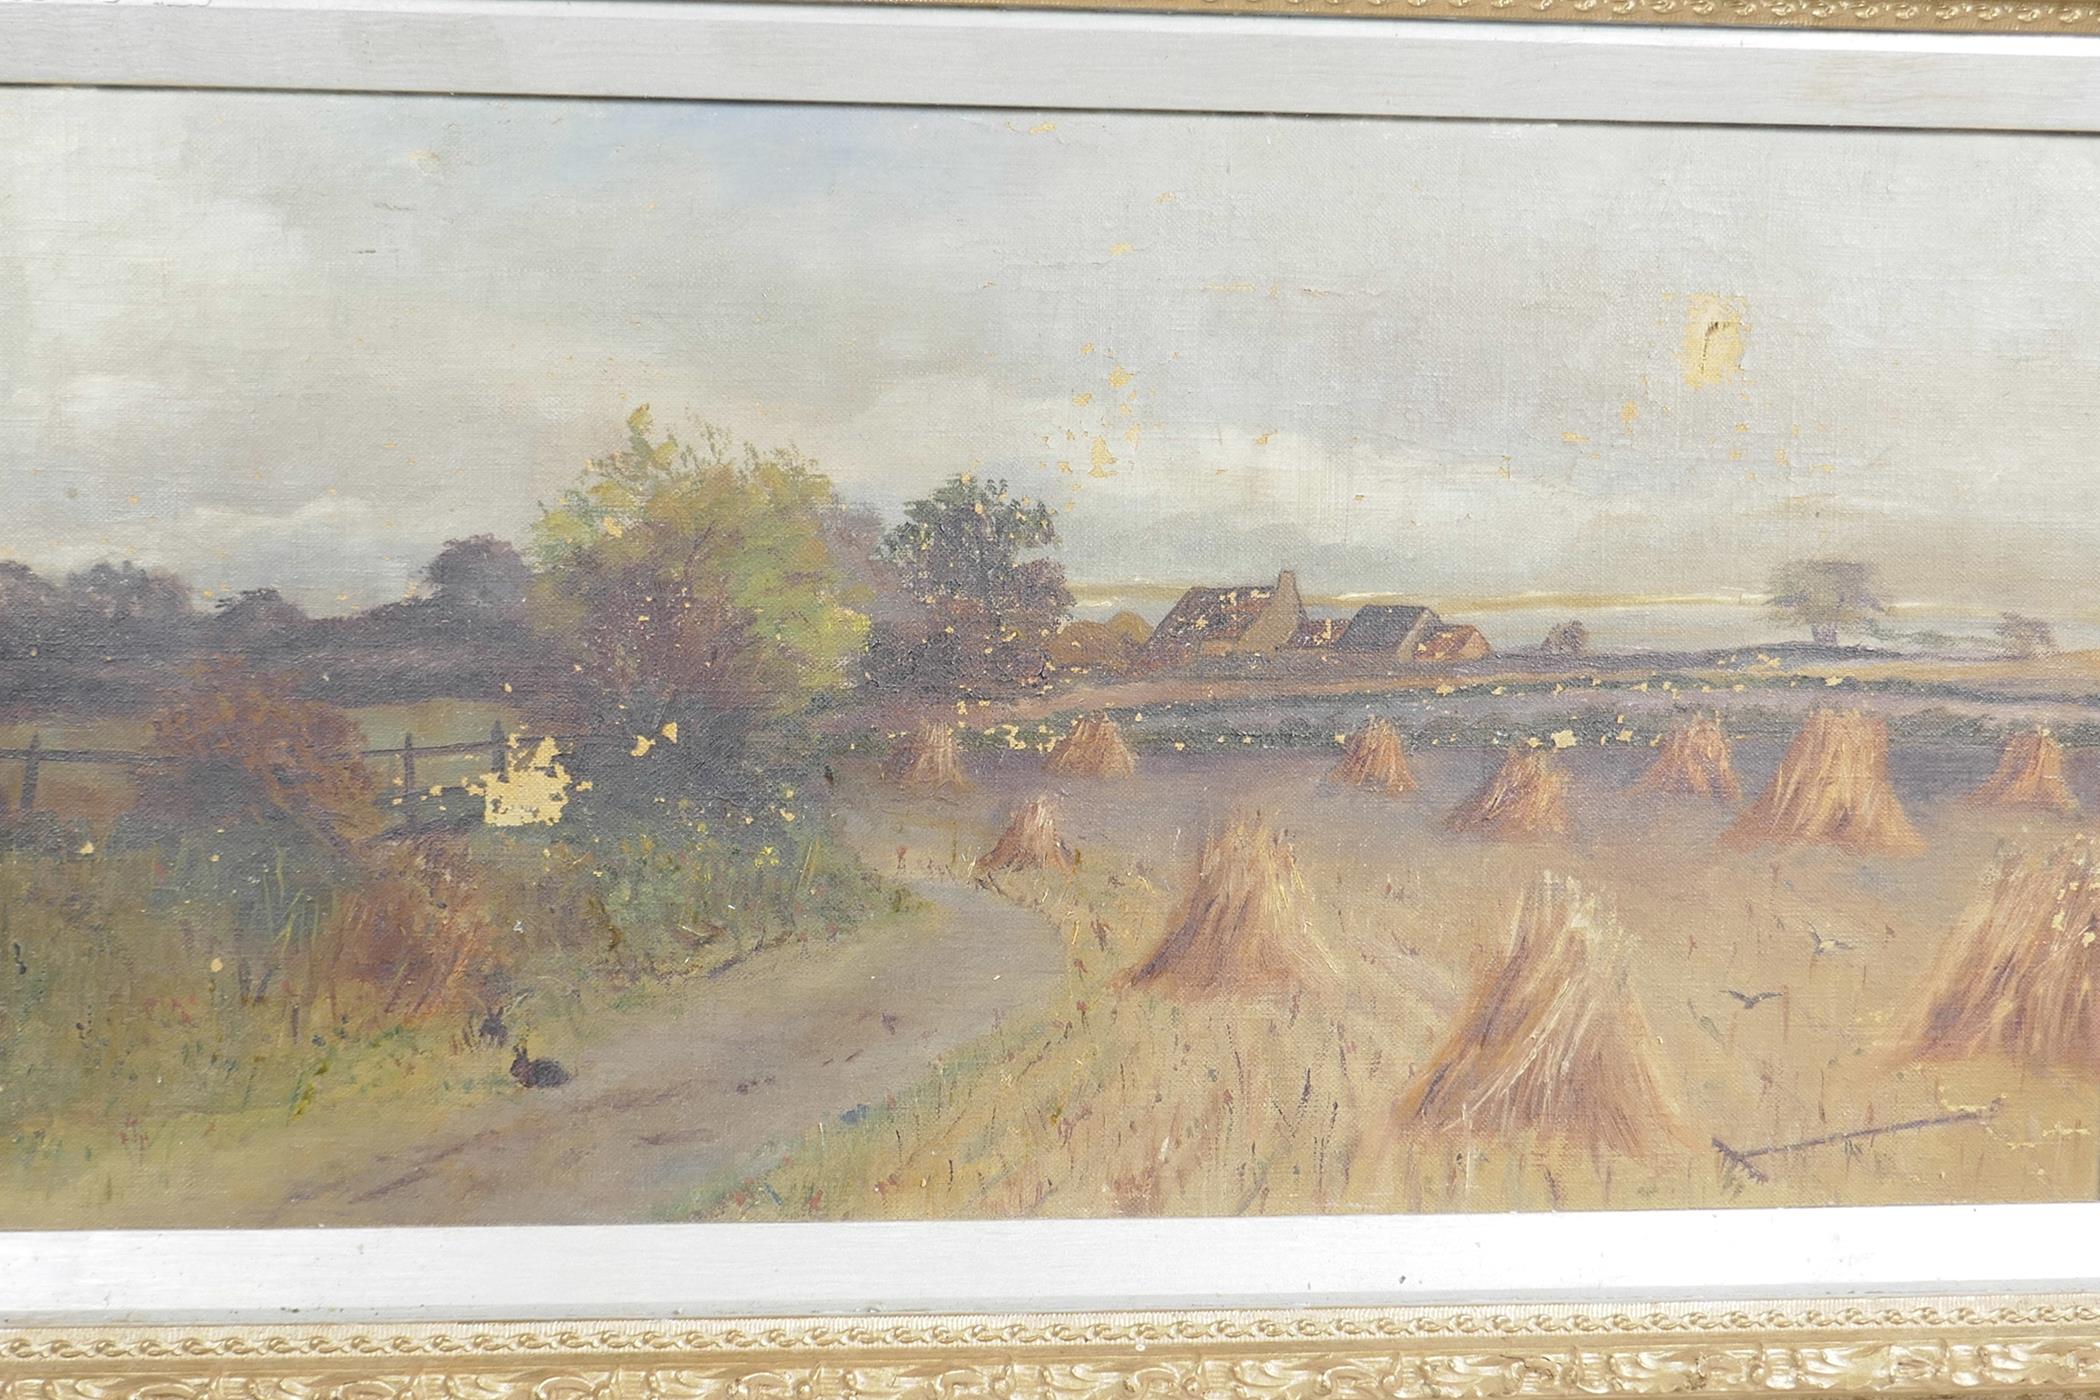 Corn stooks in a field with farm buildings beyond, 20" x 10" - Image 2 of 3